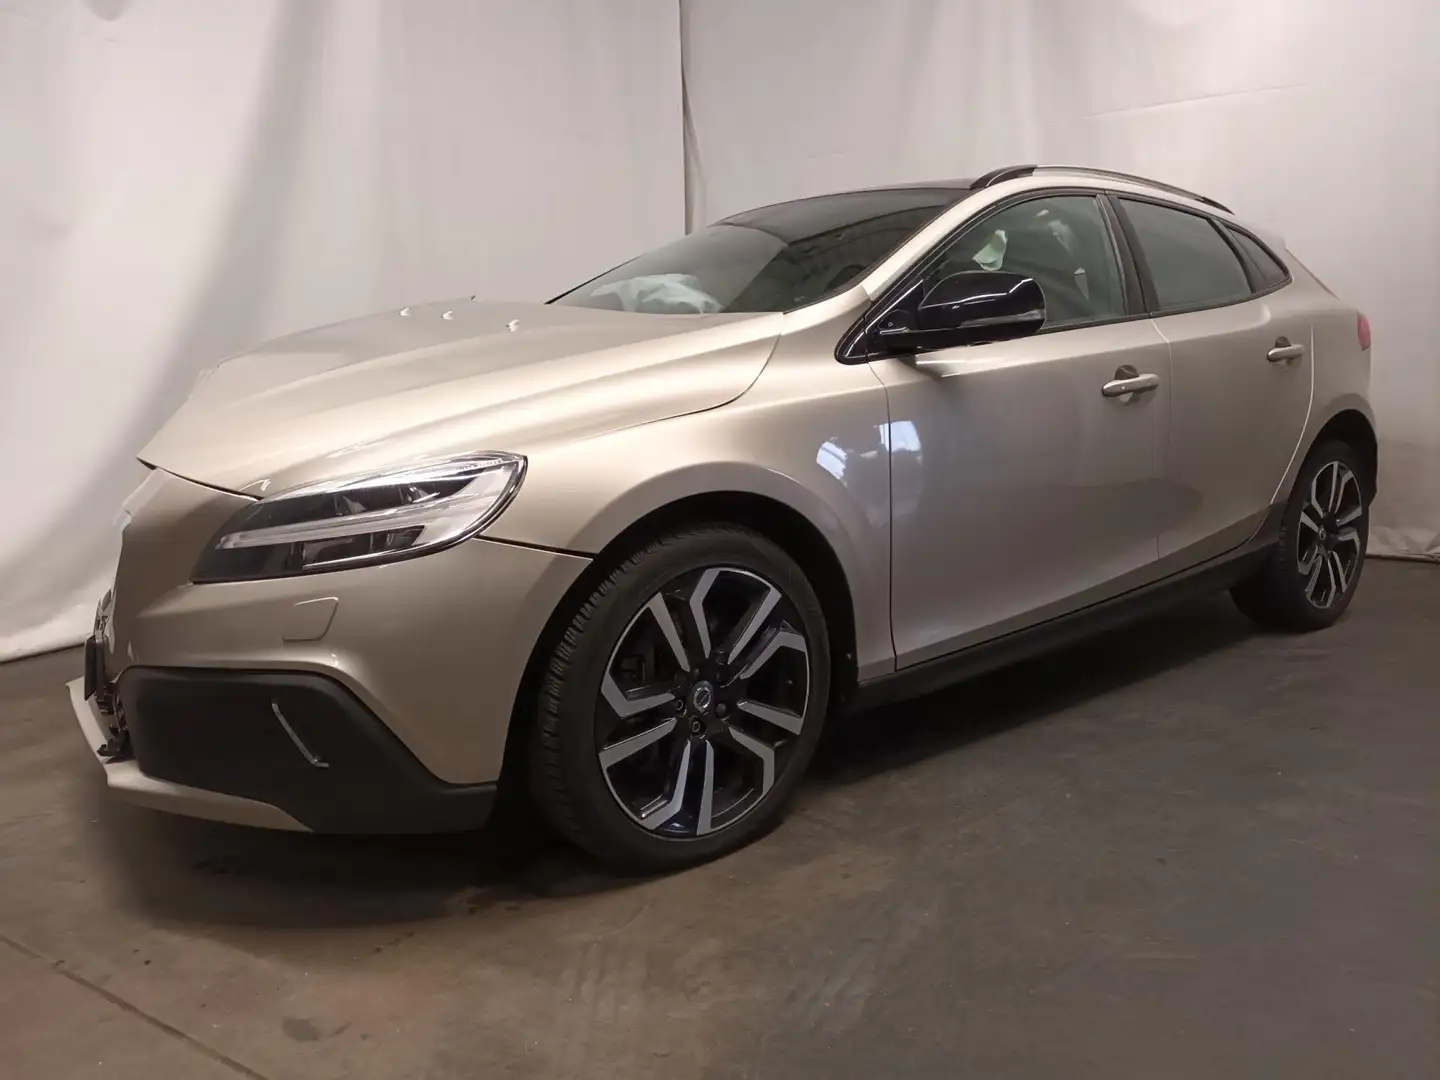 Volvo V40 Cross Country 1.5 T3 Nordic+ - Front Schade - Airbags Defect Brązowy - 2